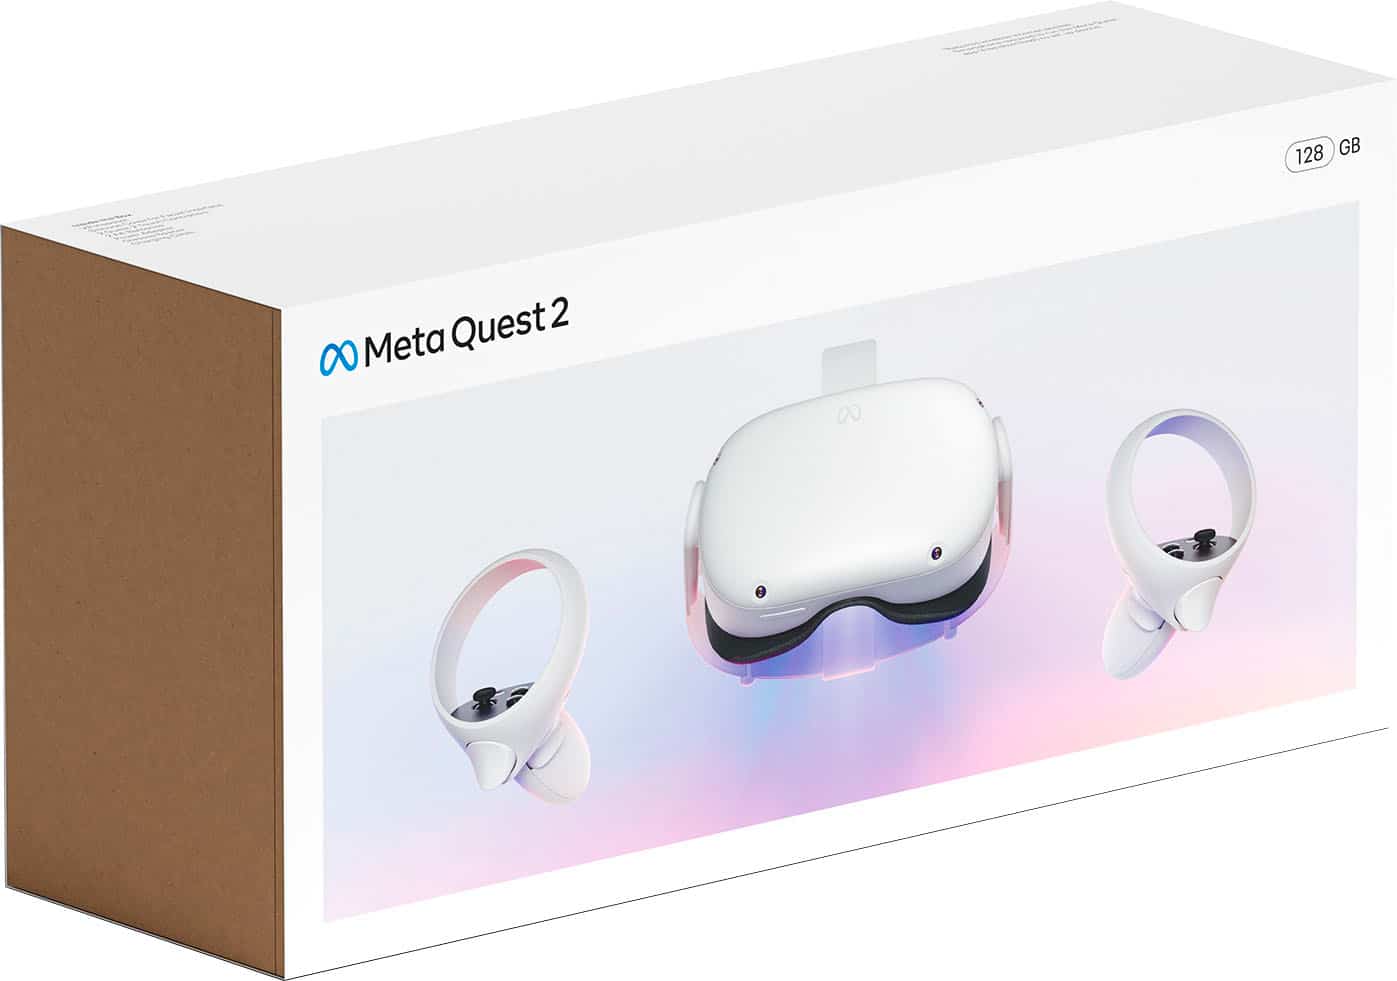 Meta is already replacing Oculus Quest 2 with Meta Quest 2 in its ads ...